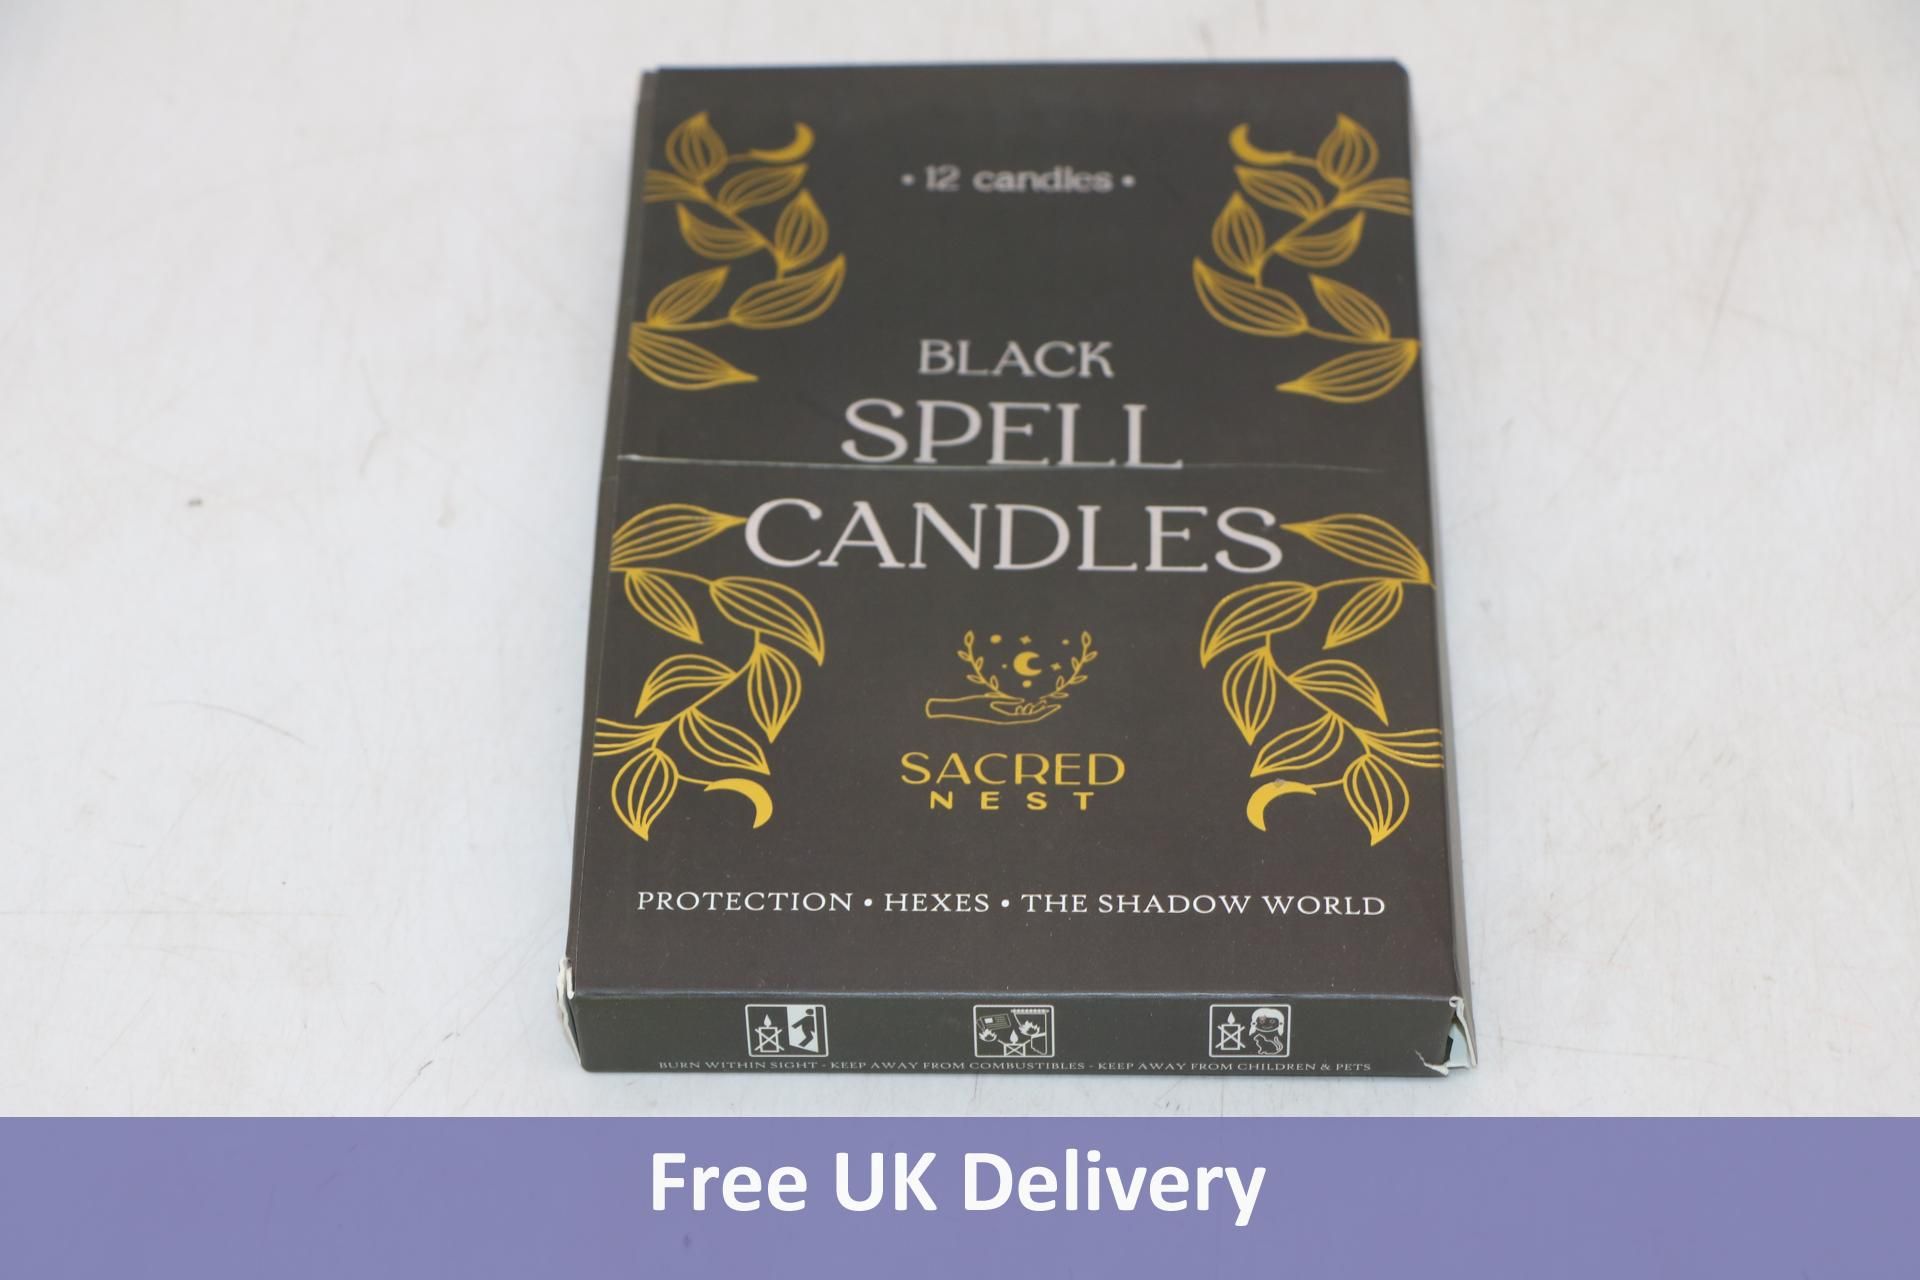 Forty-two Boxes of Sacred Nest Black Spell Candles, Black, 12 Candles Per Pack, Some Boxes Damaged